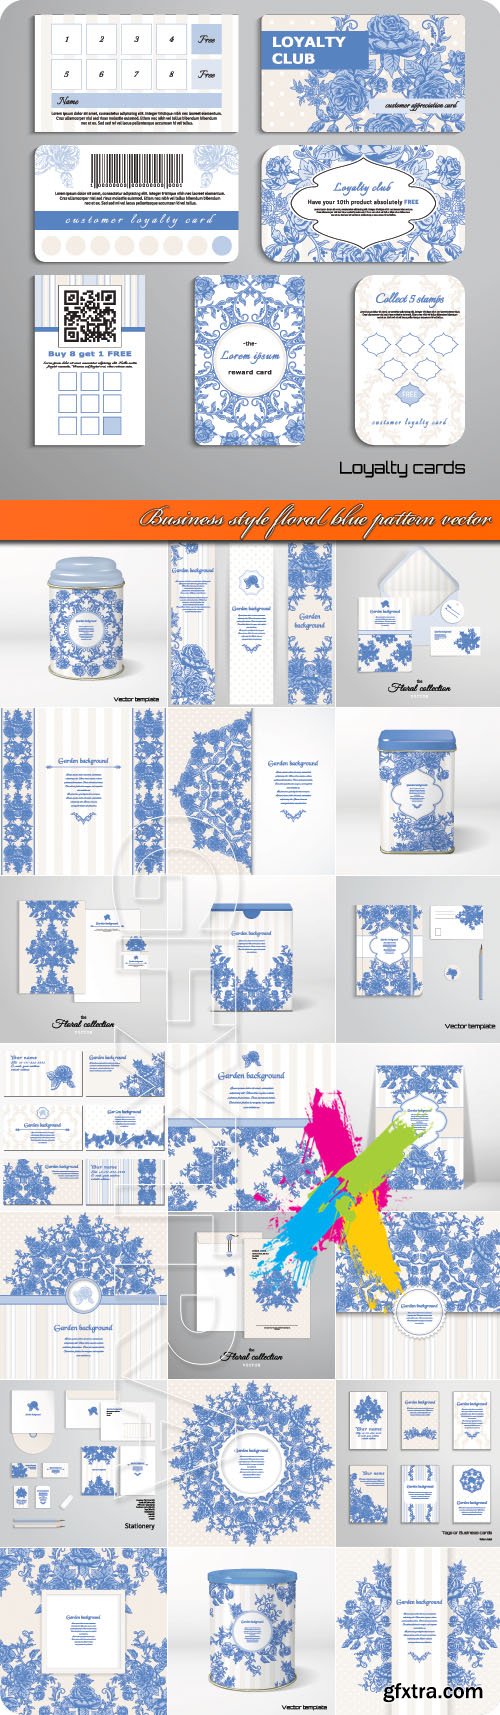 Business style floral blue pattern vector